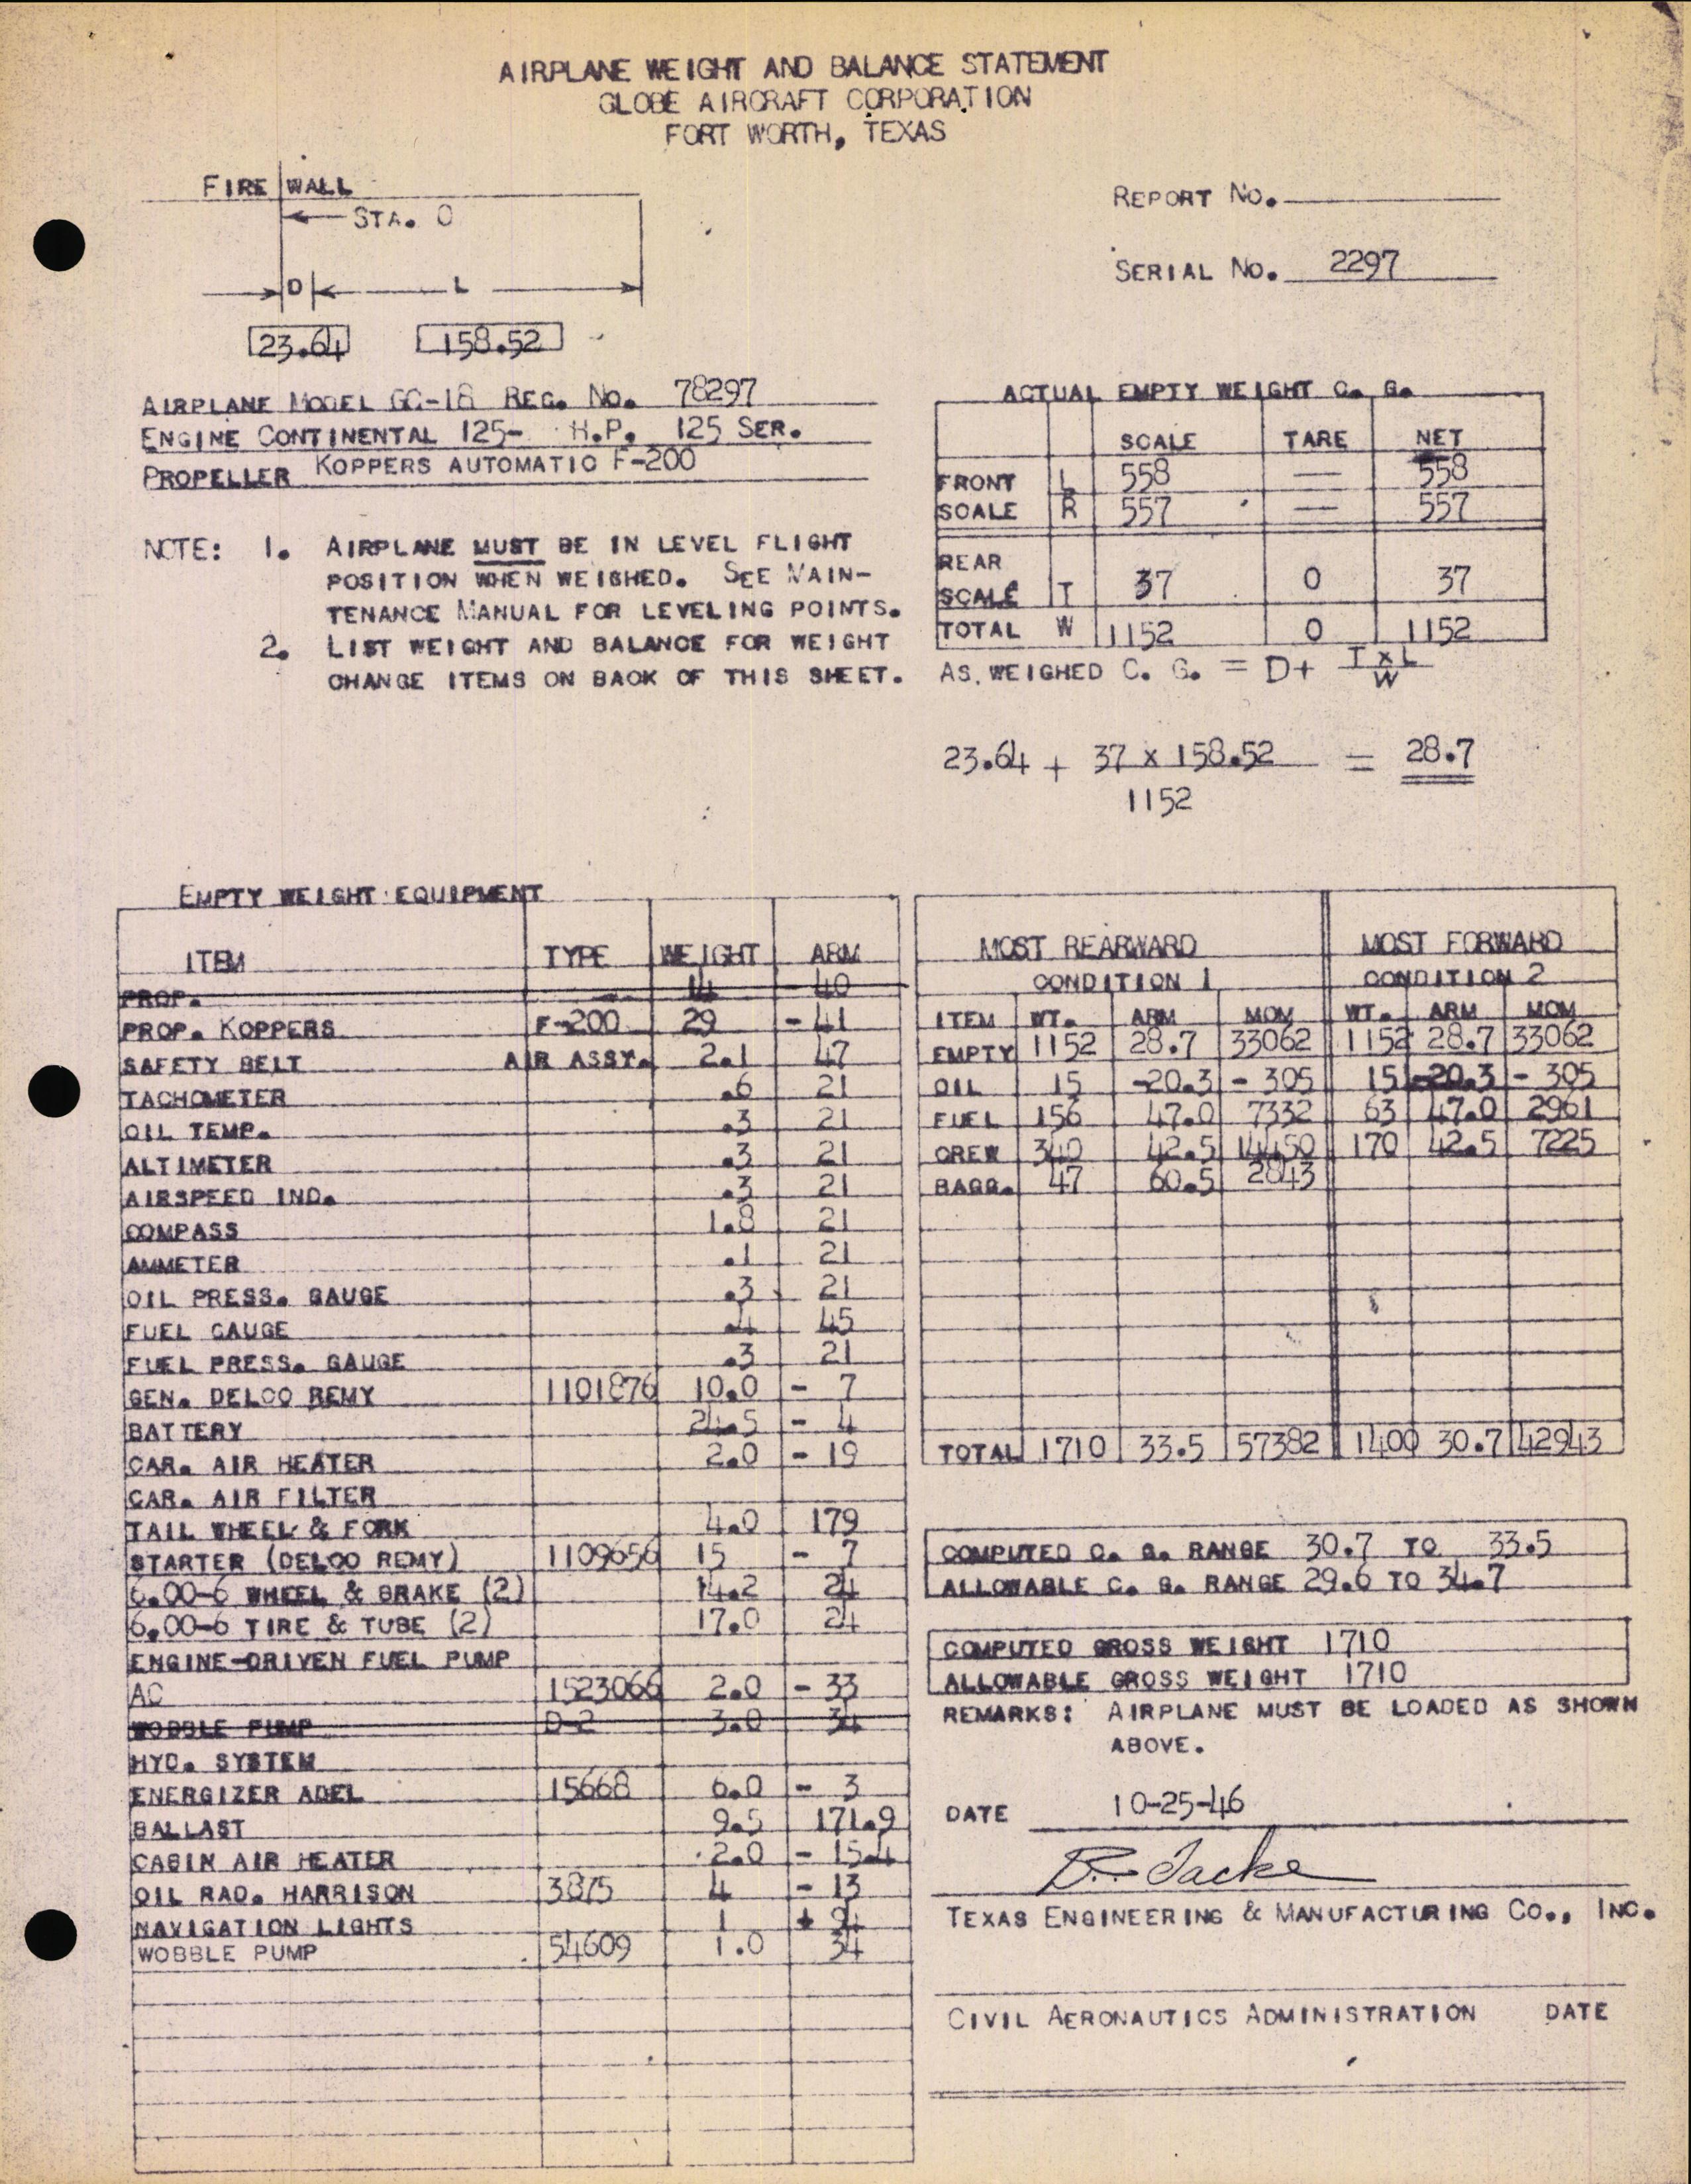 Sample page 4 from AirCorps Library document: Technical Information for Serial Number 2297